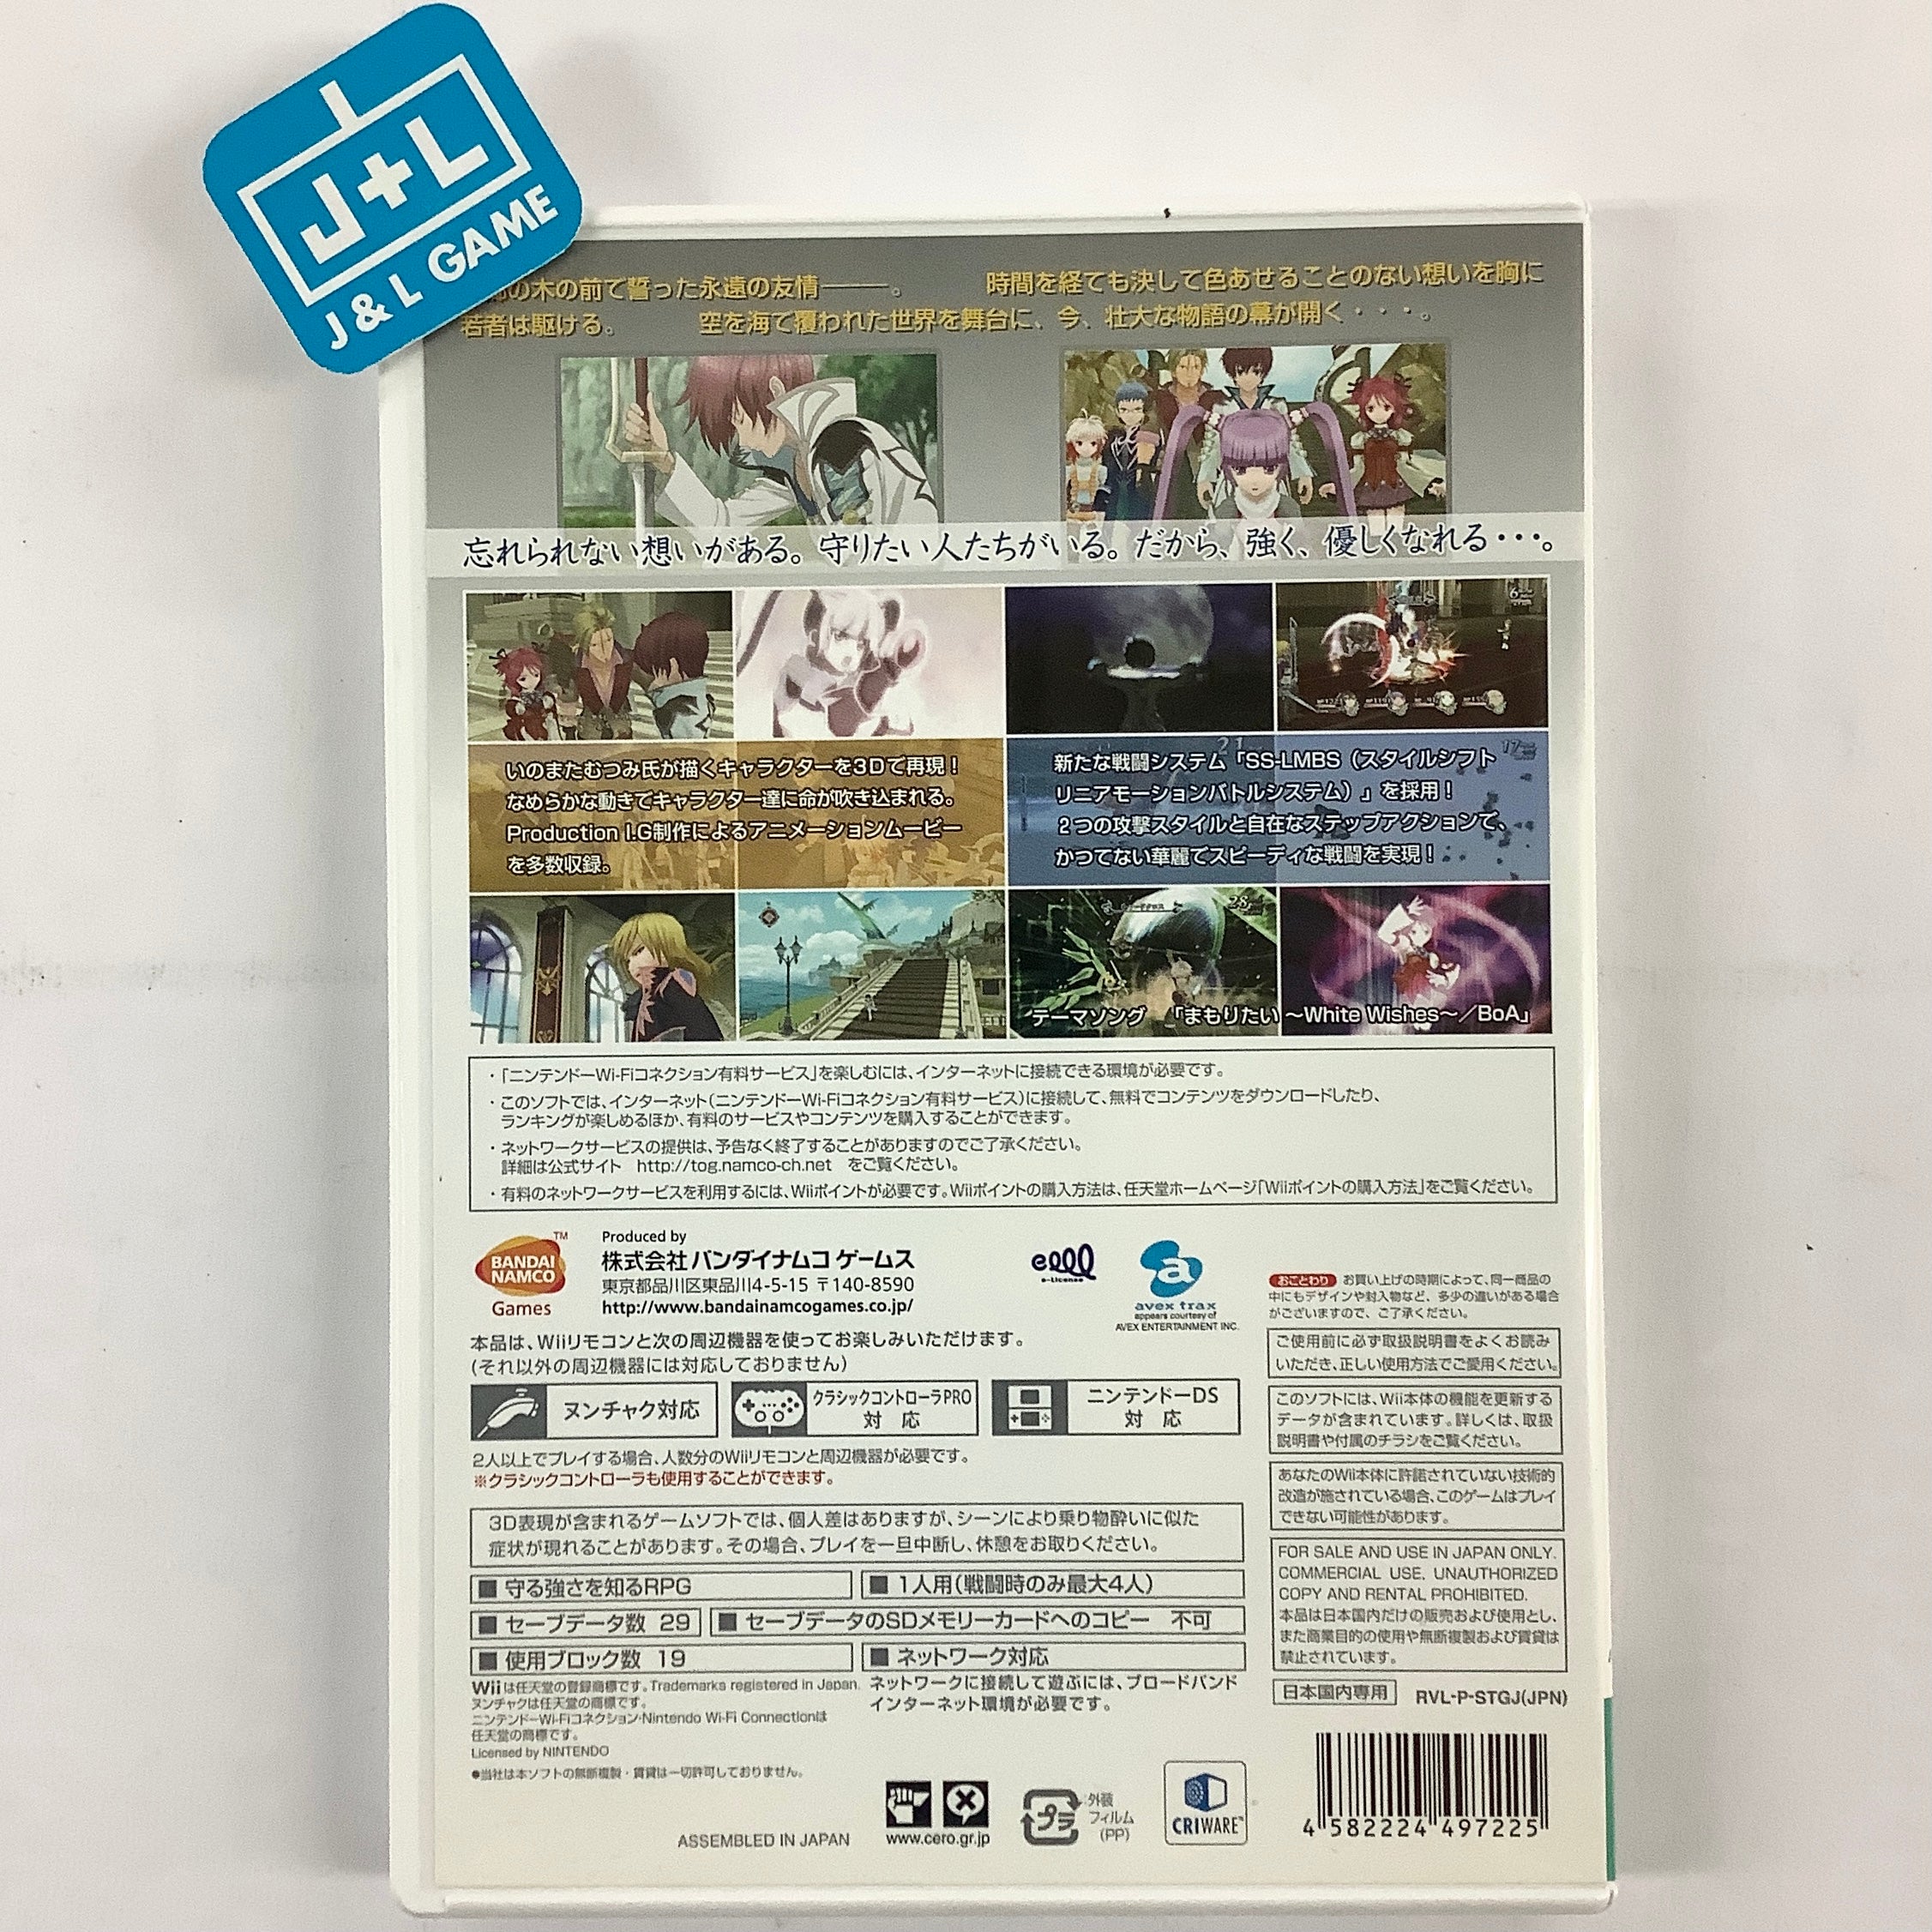 Tales of Graces - Nintendo Wii [Pre-Owned] (Japanese Import) Video Games Bandai Namco Games   